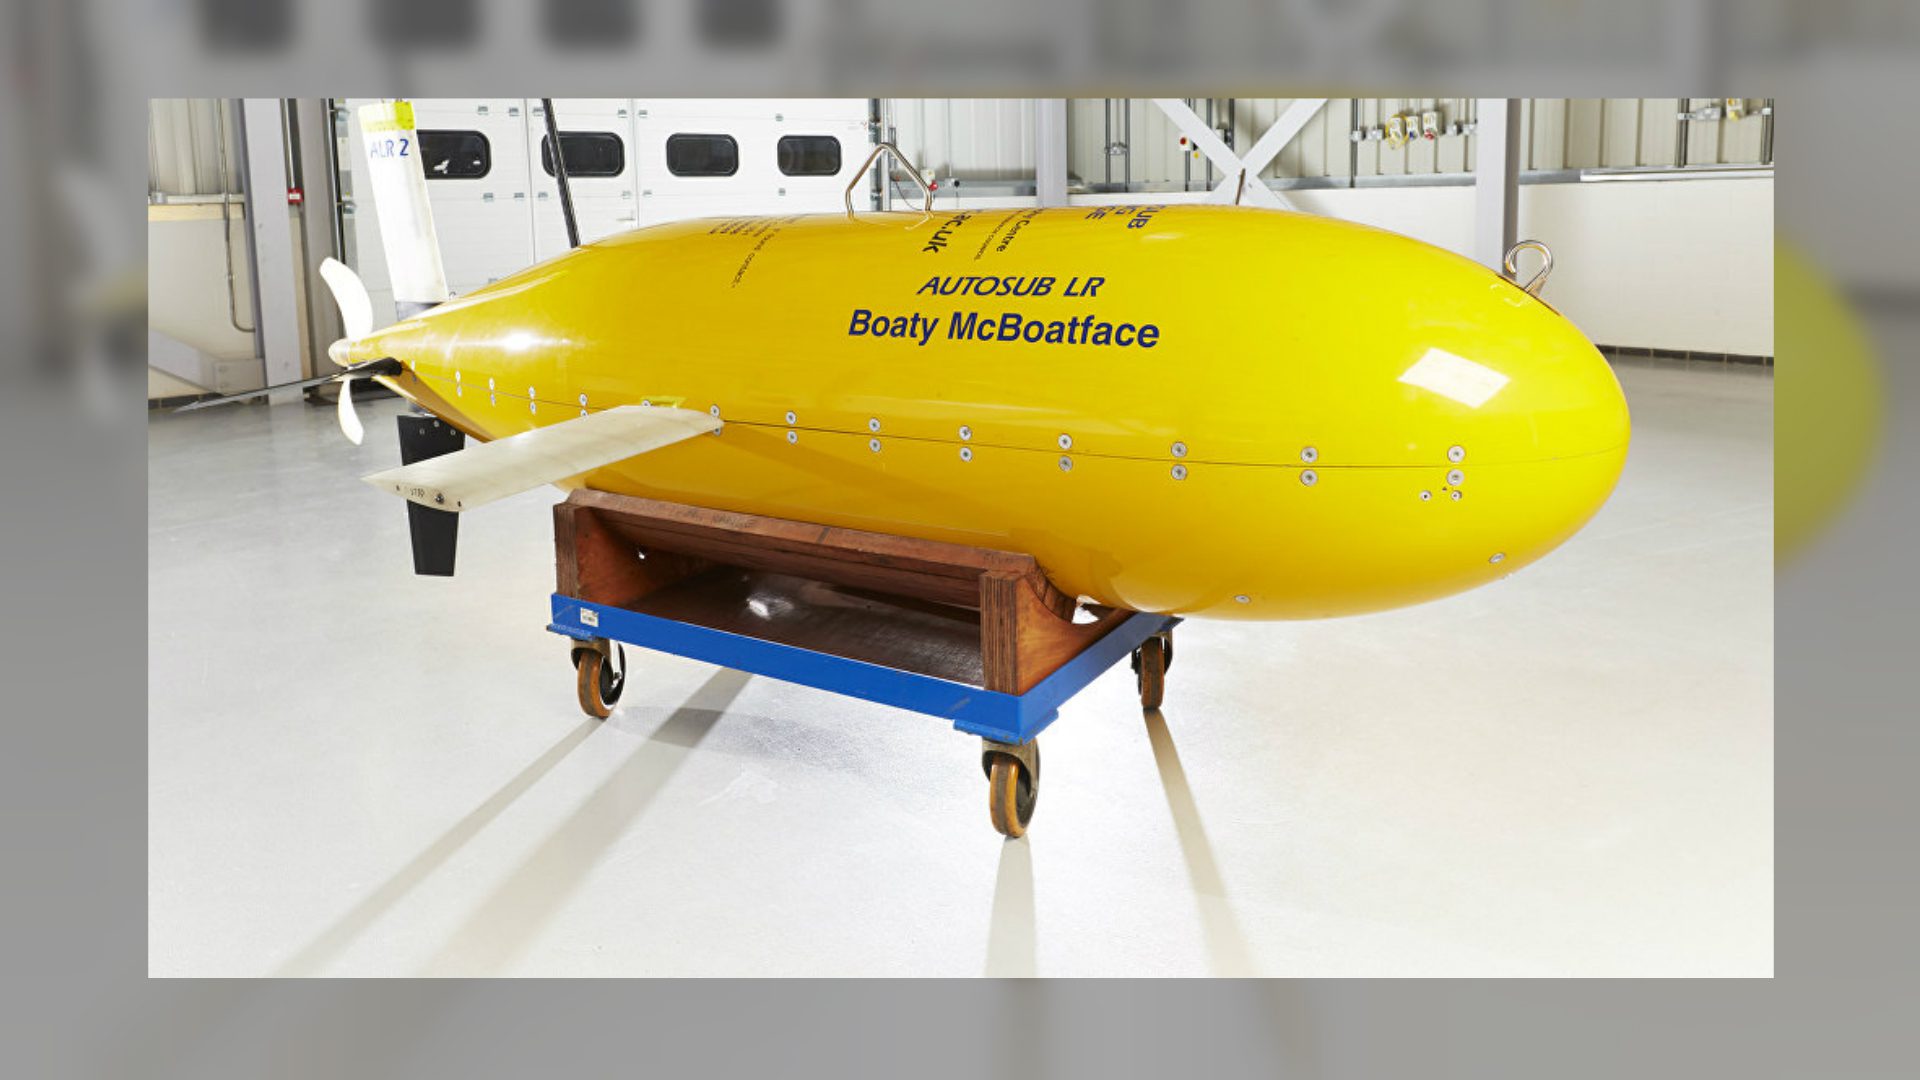 Boaty McBoatface is ready for its first Antarctic mission